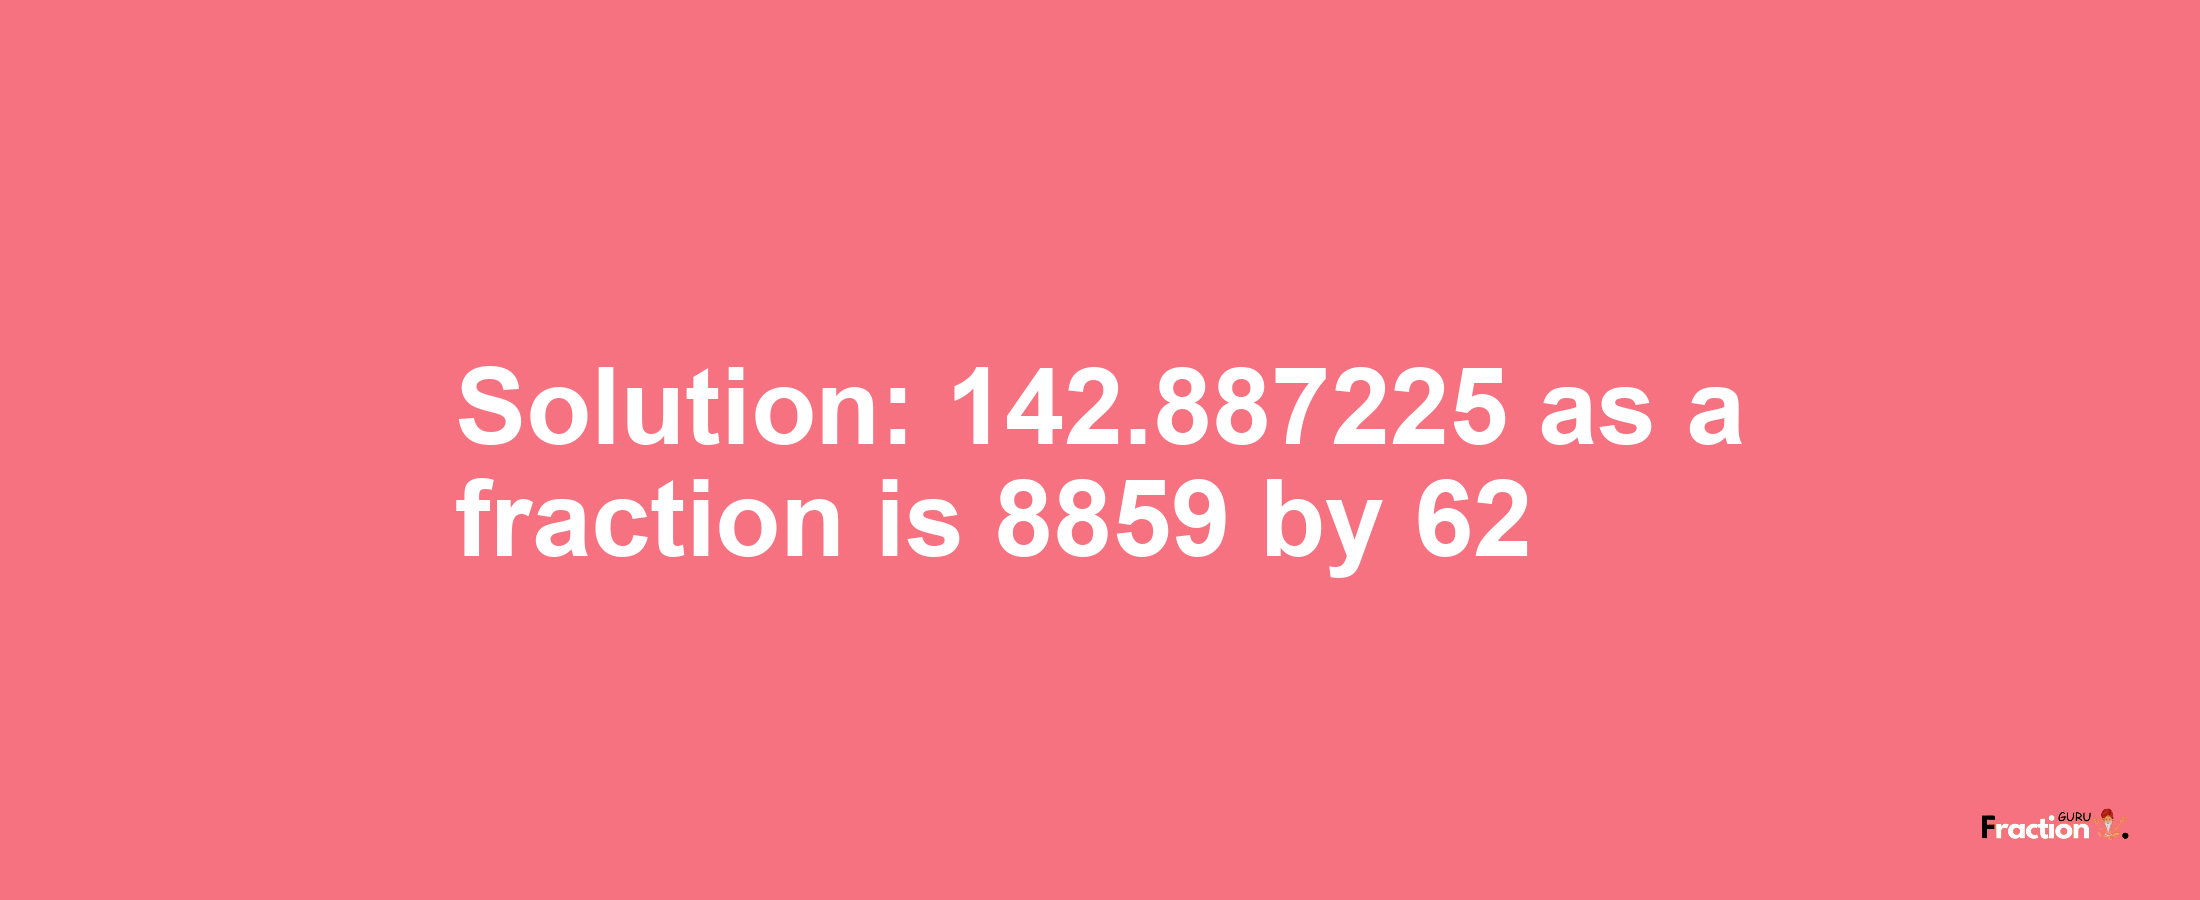 Solution:142.887225 as a fraction is 8859/62